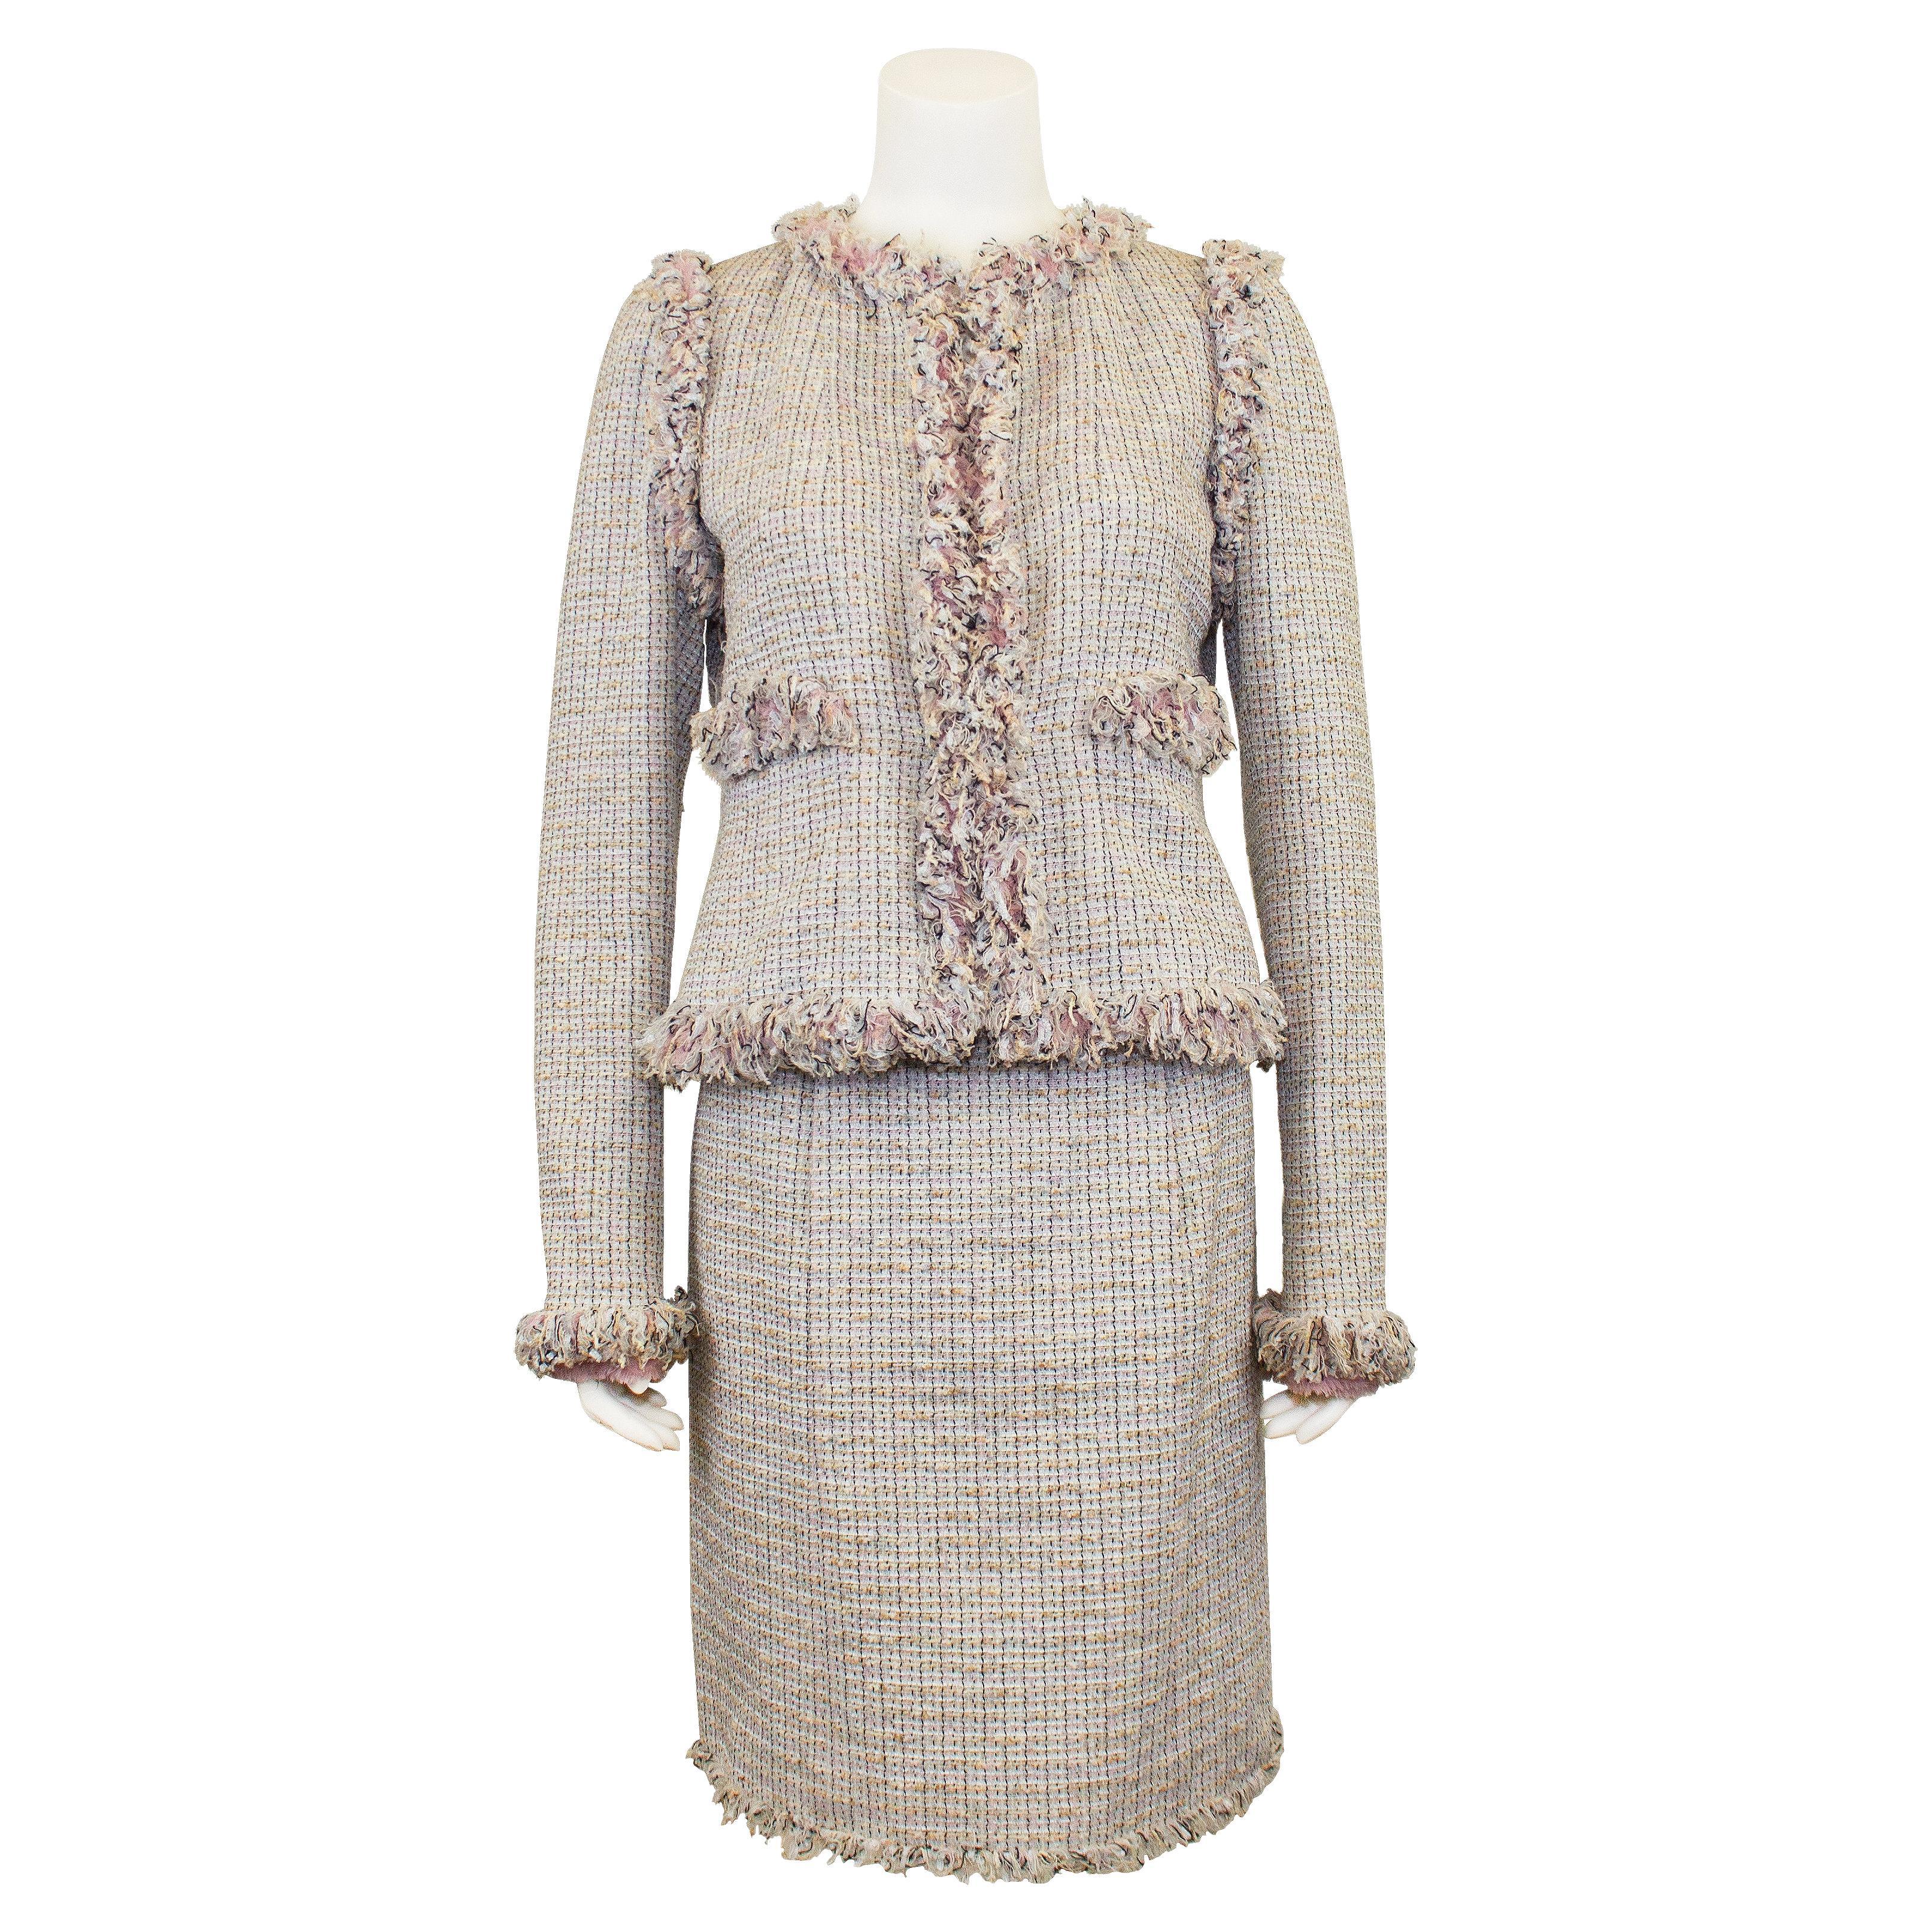 1940's/50's Tan Speckled Wool Tweed Jacket and Skirt 